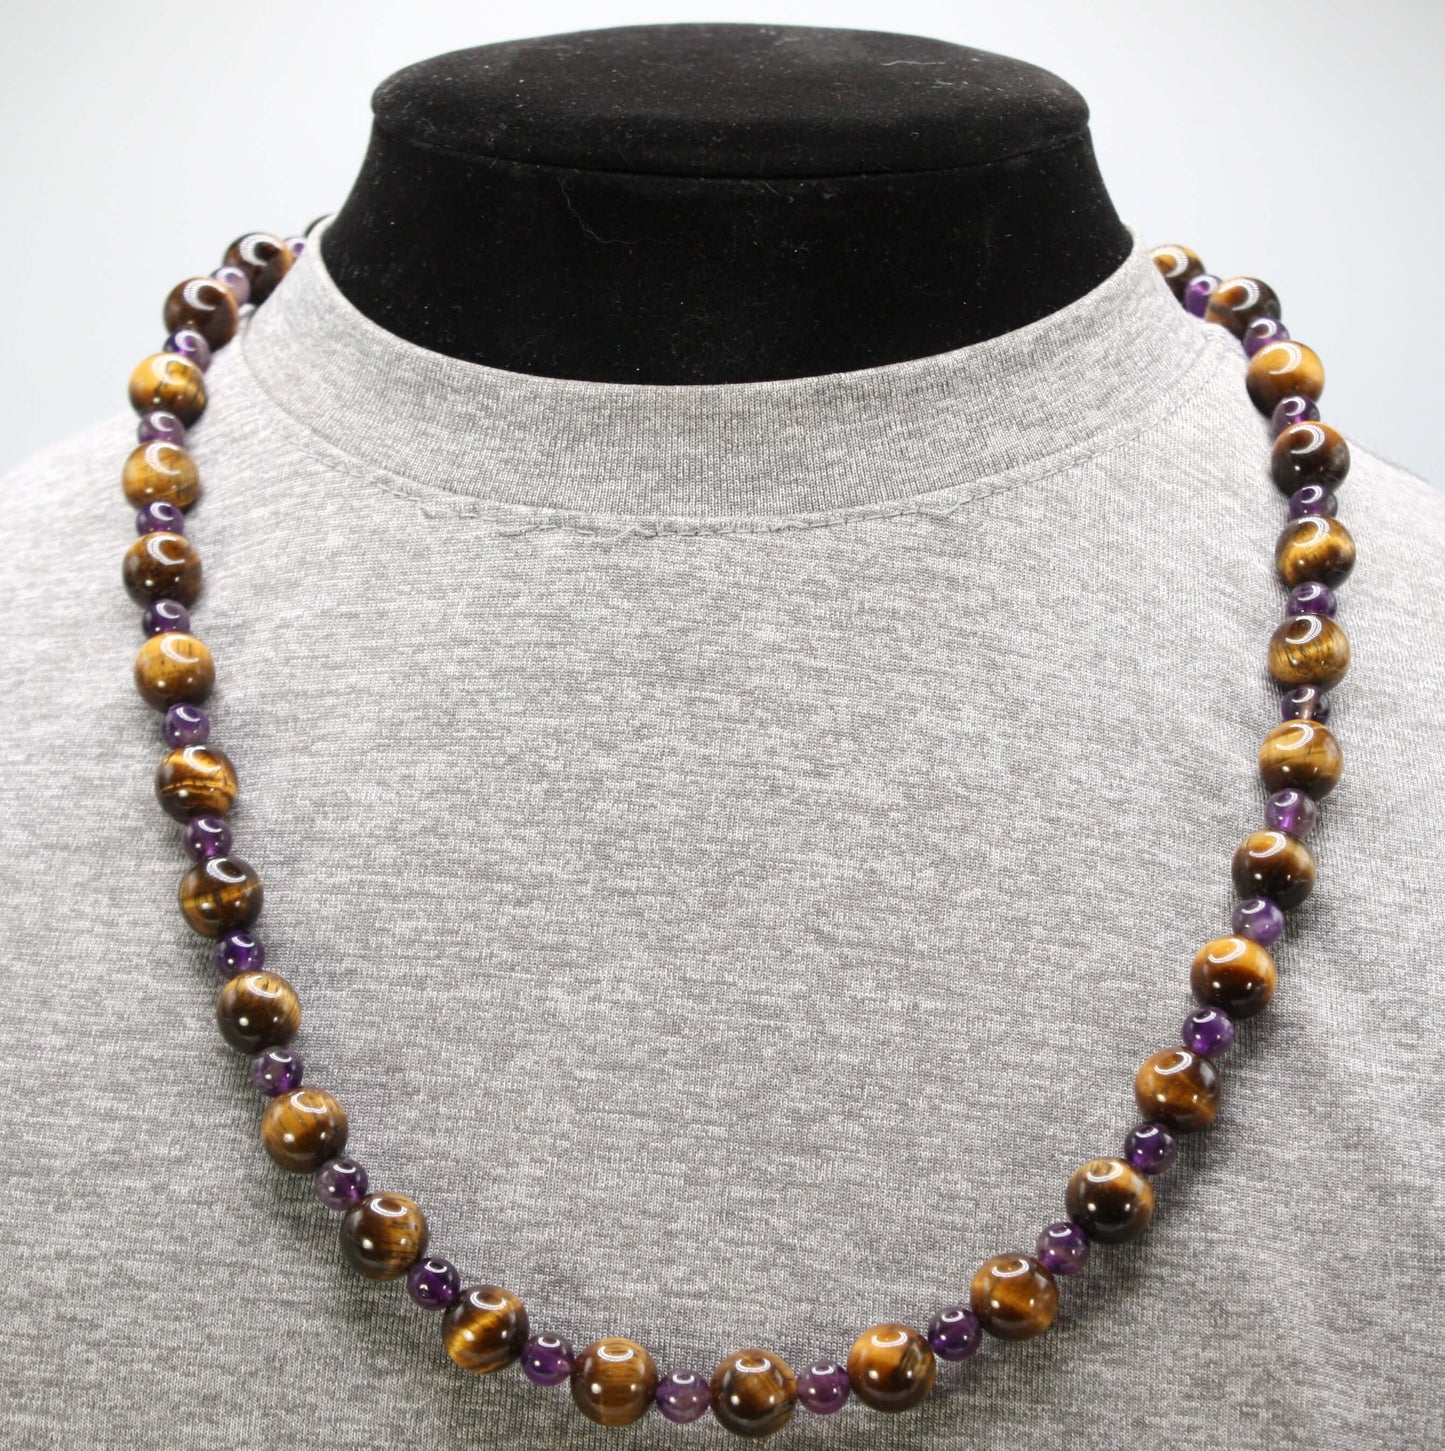 Genuine Tigers Eye and Amethyst Necklace - Gifts for Men/Women - 10mm and 6mm Beaded Necklace